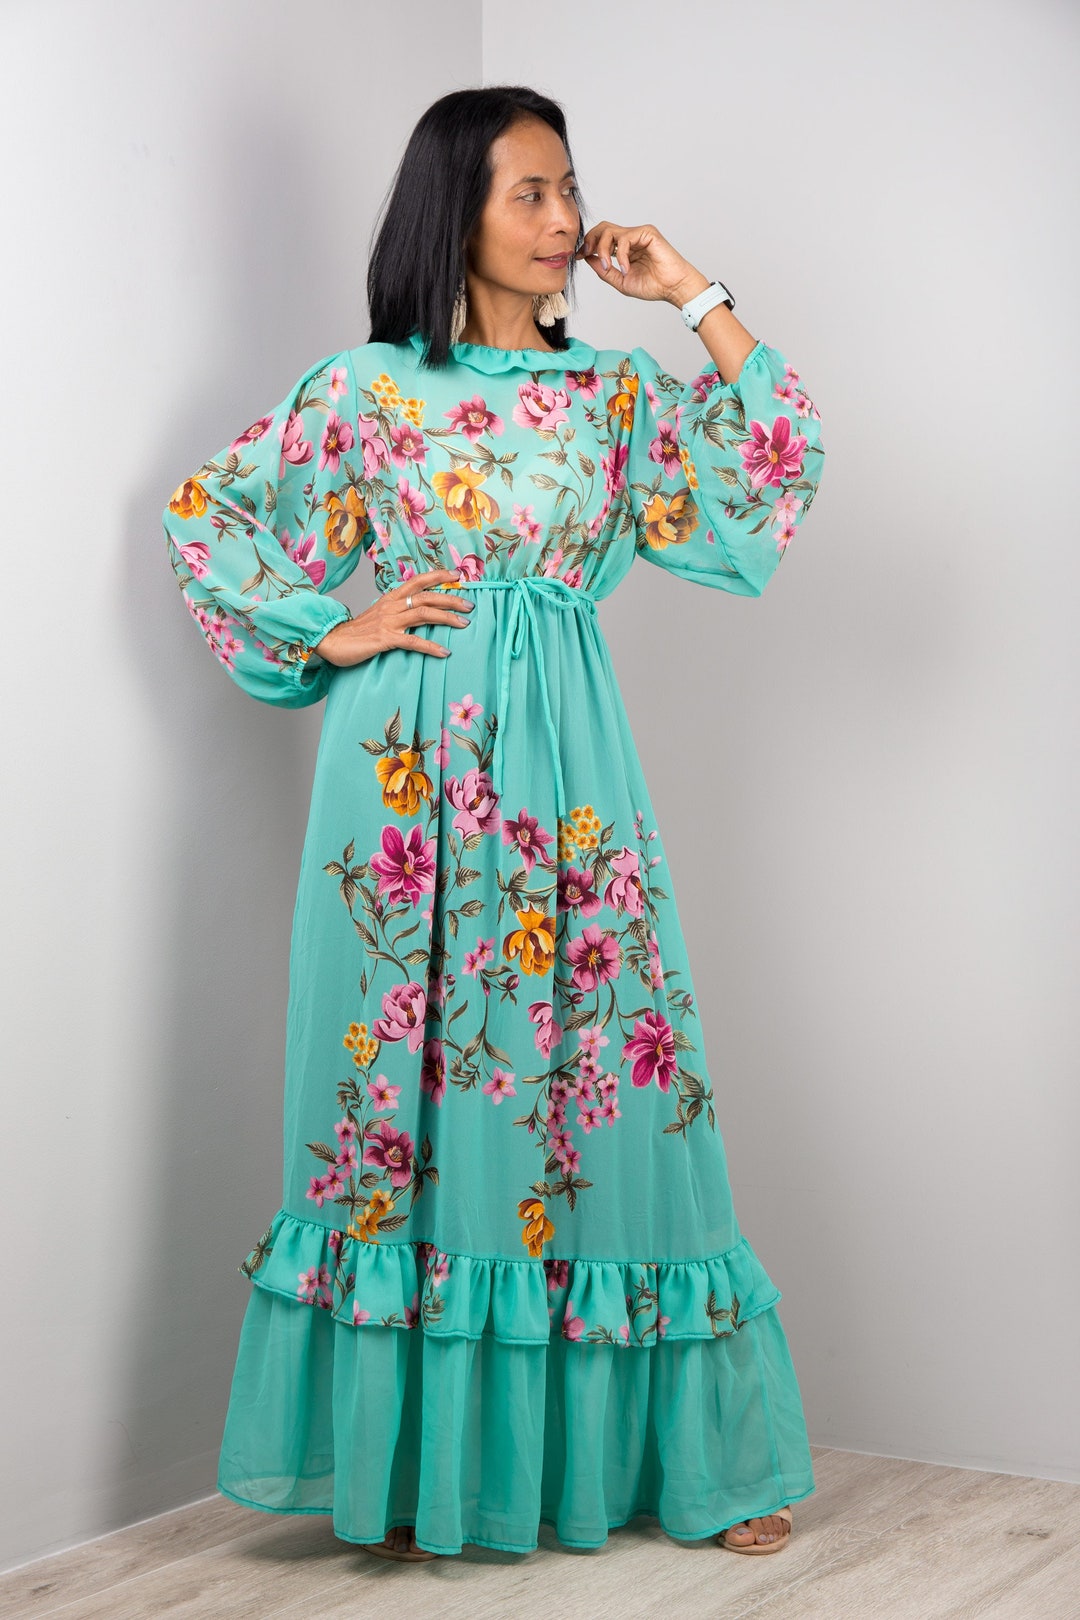 Floral Chiffon Maxi Dress Long Sleeves Modest Gown Dress With - Etsy